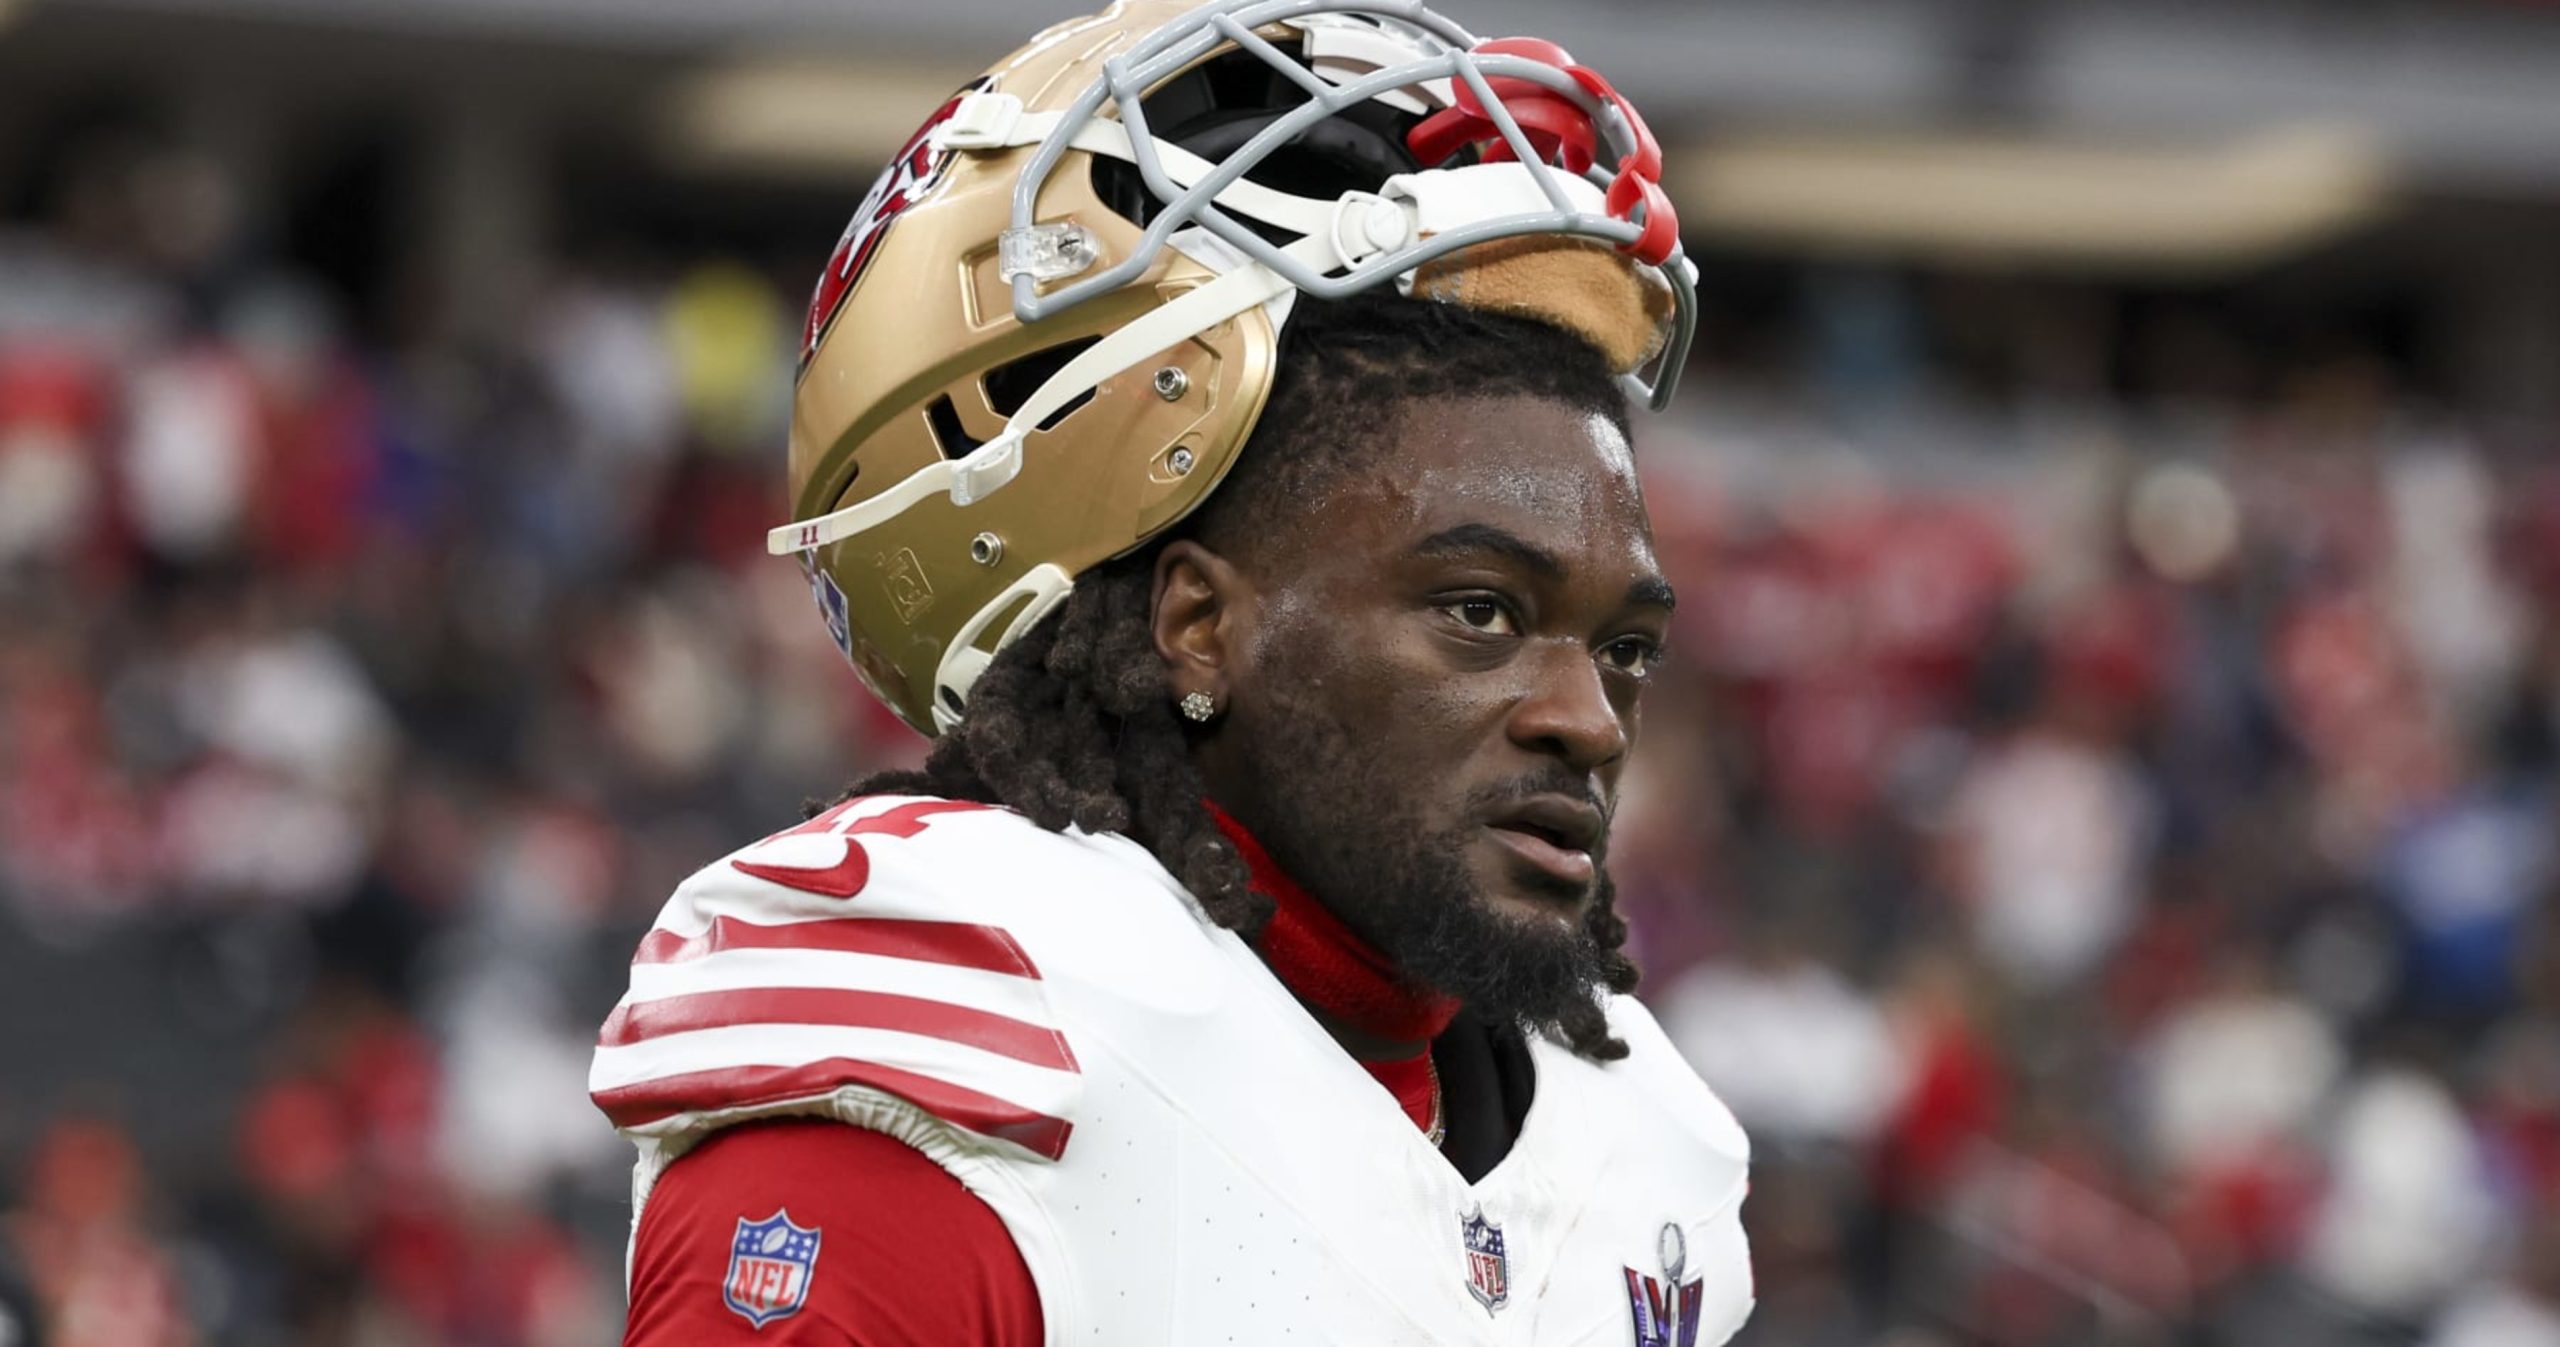 What's Next for the 49ers? Ricky Pearsall Joins as Trade Rumors Swirl Around Aiyuk and Samuel